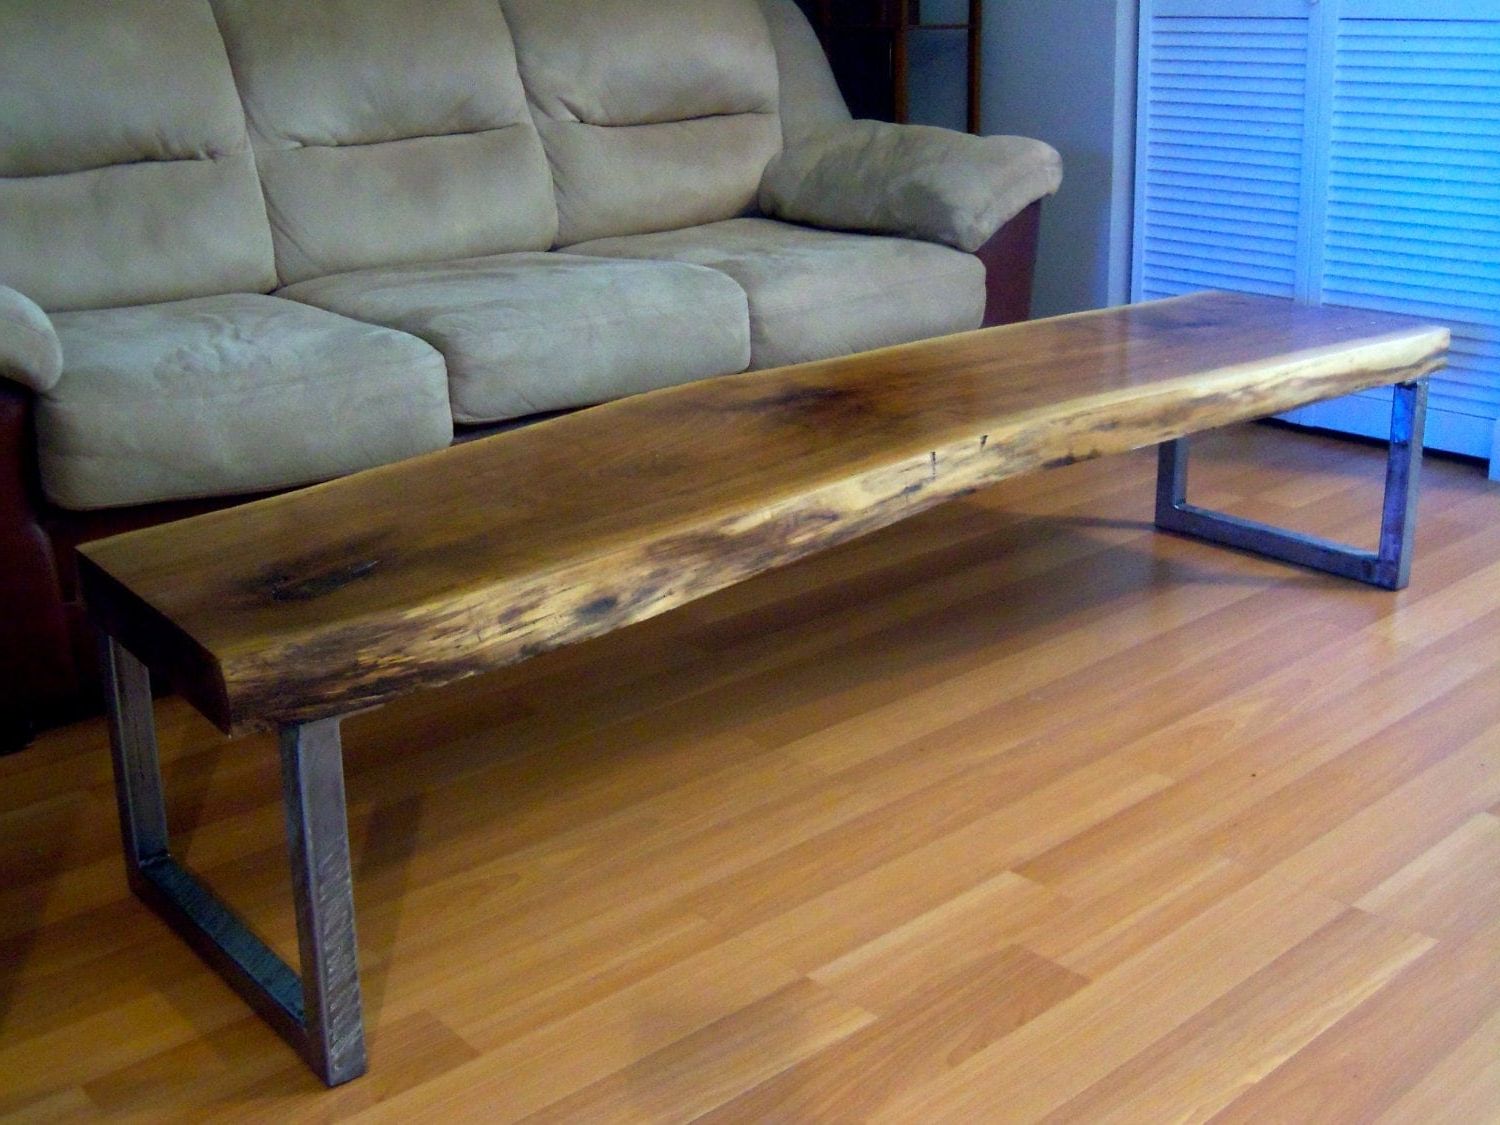 Live Edge Black Walnut Slab Coffee Table Intended For Recent Walnut Coffee Tables (View 7 of 20)